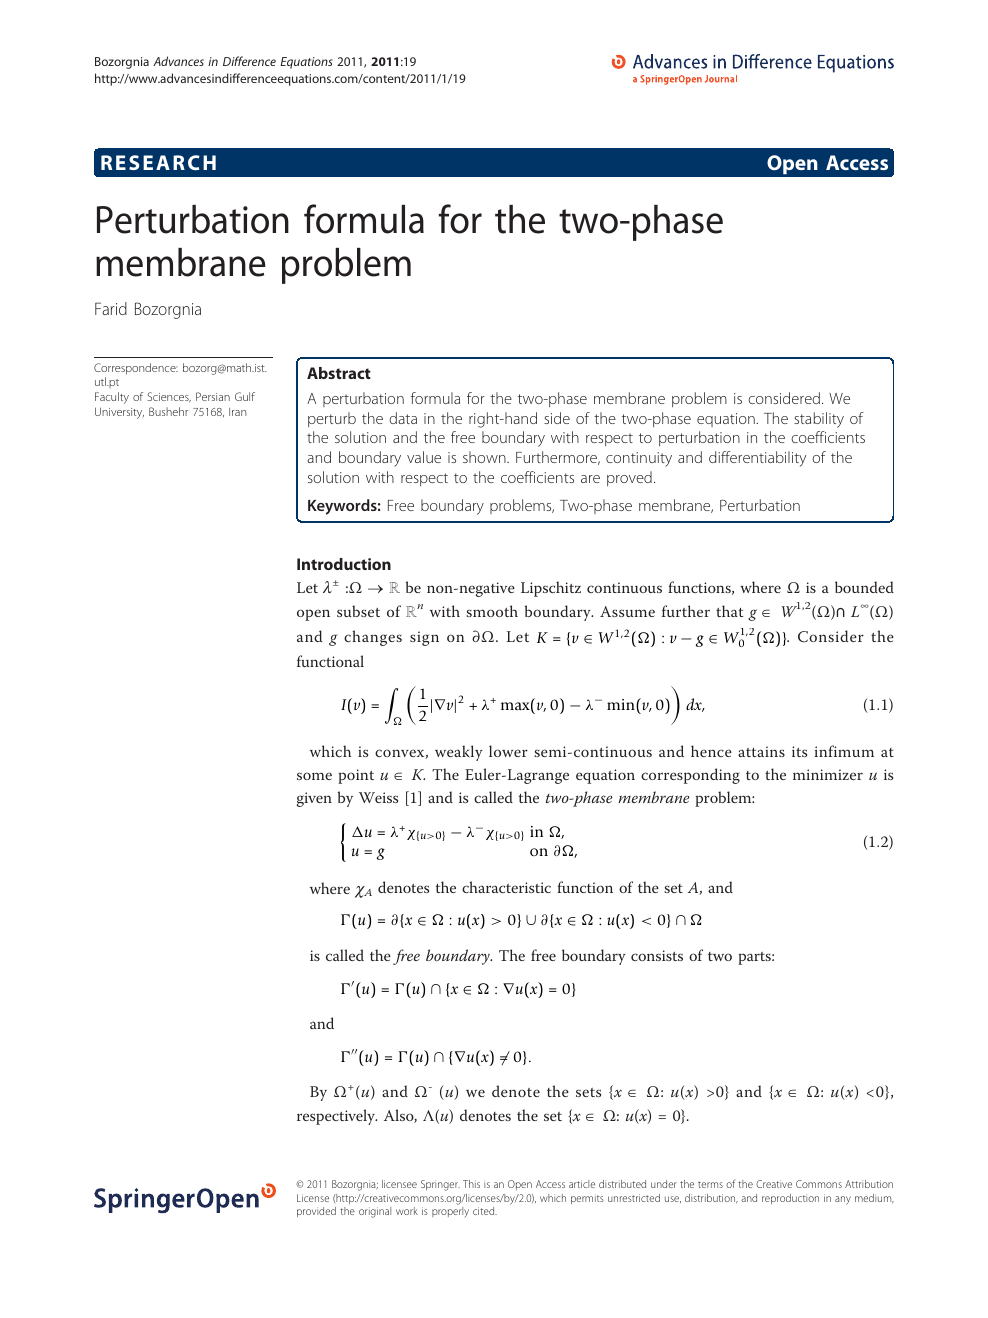 Perturbation Formula For The Two Phase Membrane Problem Topic Of Research Paper In Mathematics Download Scholarly Article Pdf And Read For Free On Cyberleninka Open Science Hub